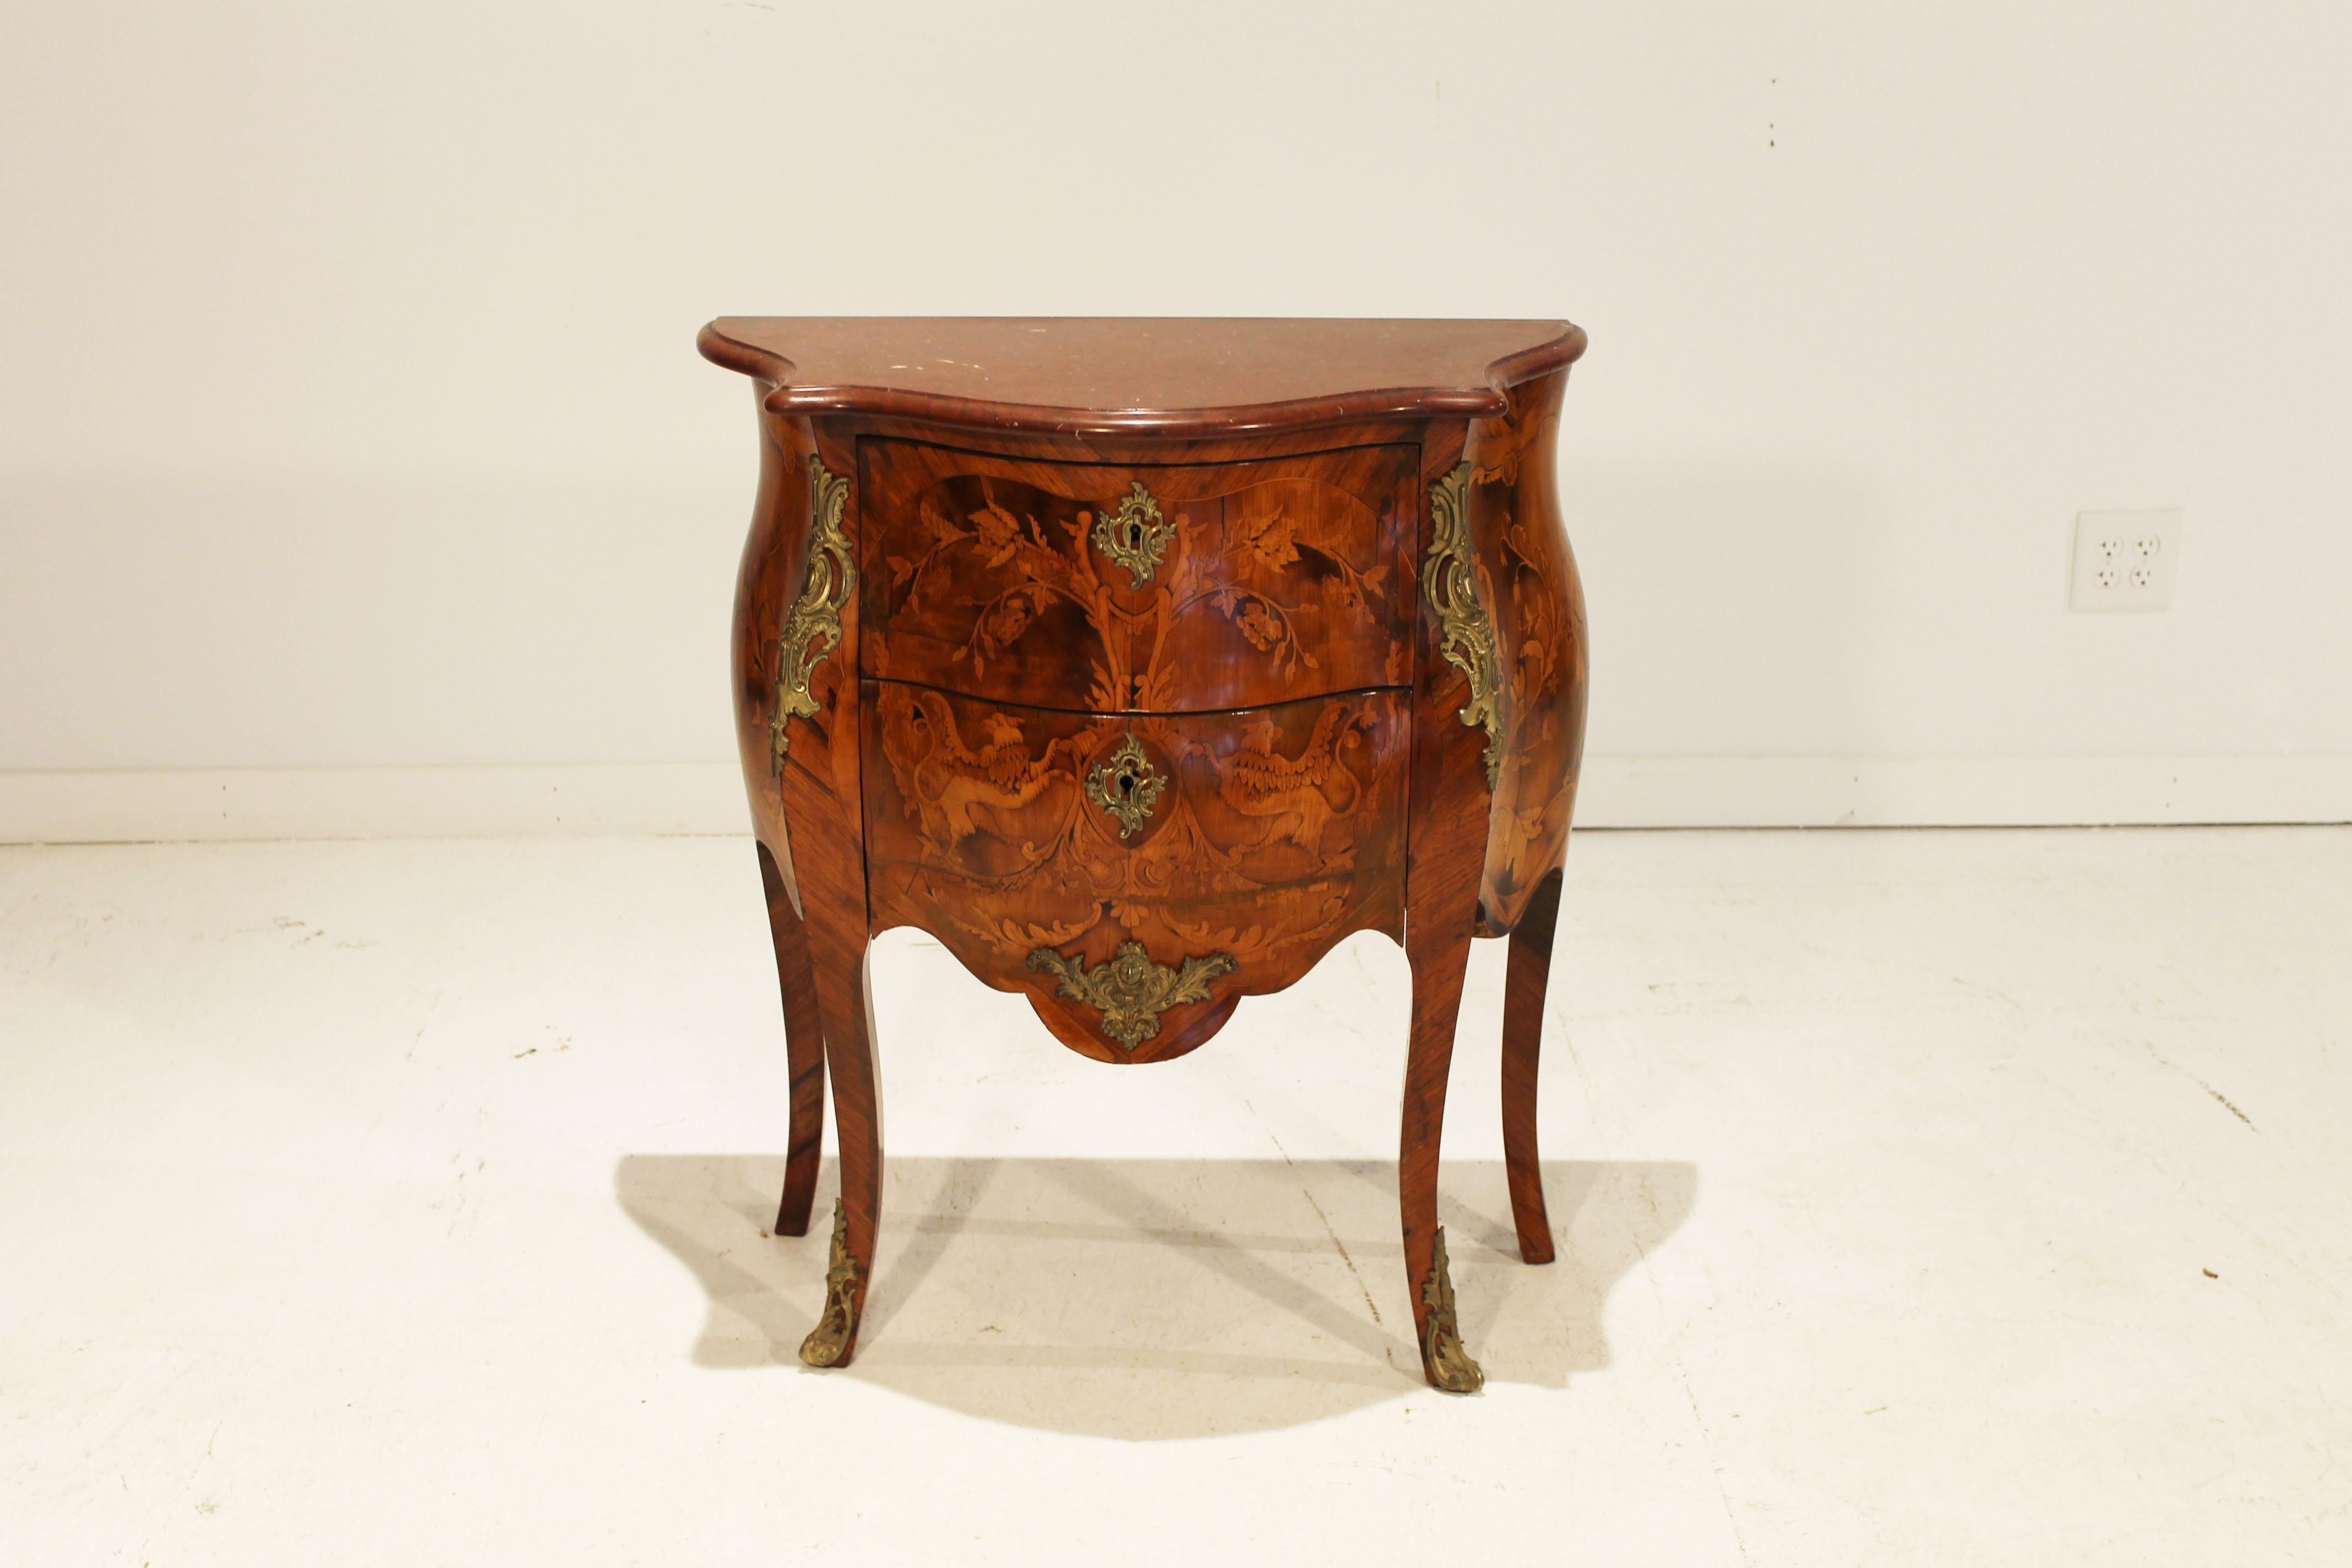 This elegant French Louis XV Belle Époque Marquetry commode is in wonderful condition and would make a gorgeous statement in a bedroom or study. This two drawer commode has exquisite inlay details found in the Louis XV period of furniture design.